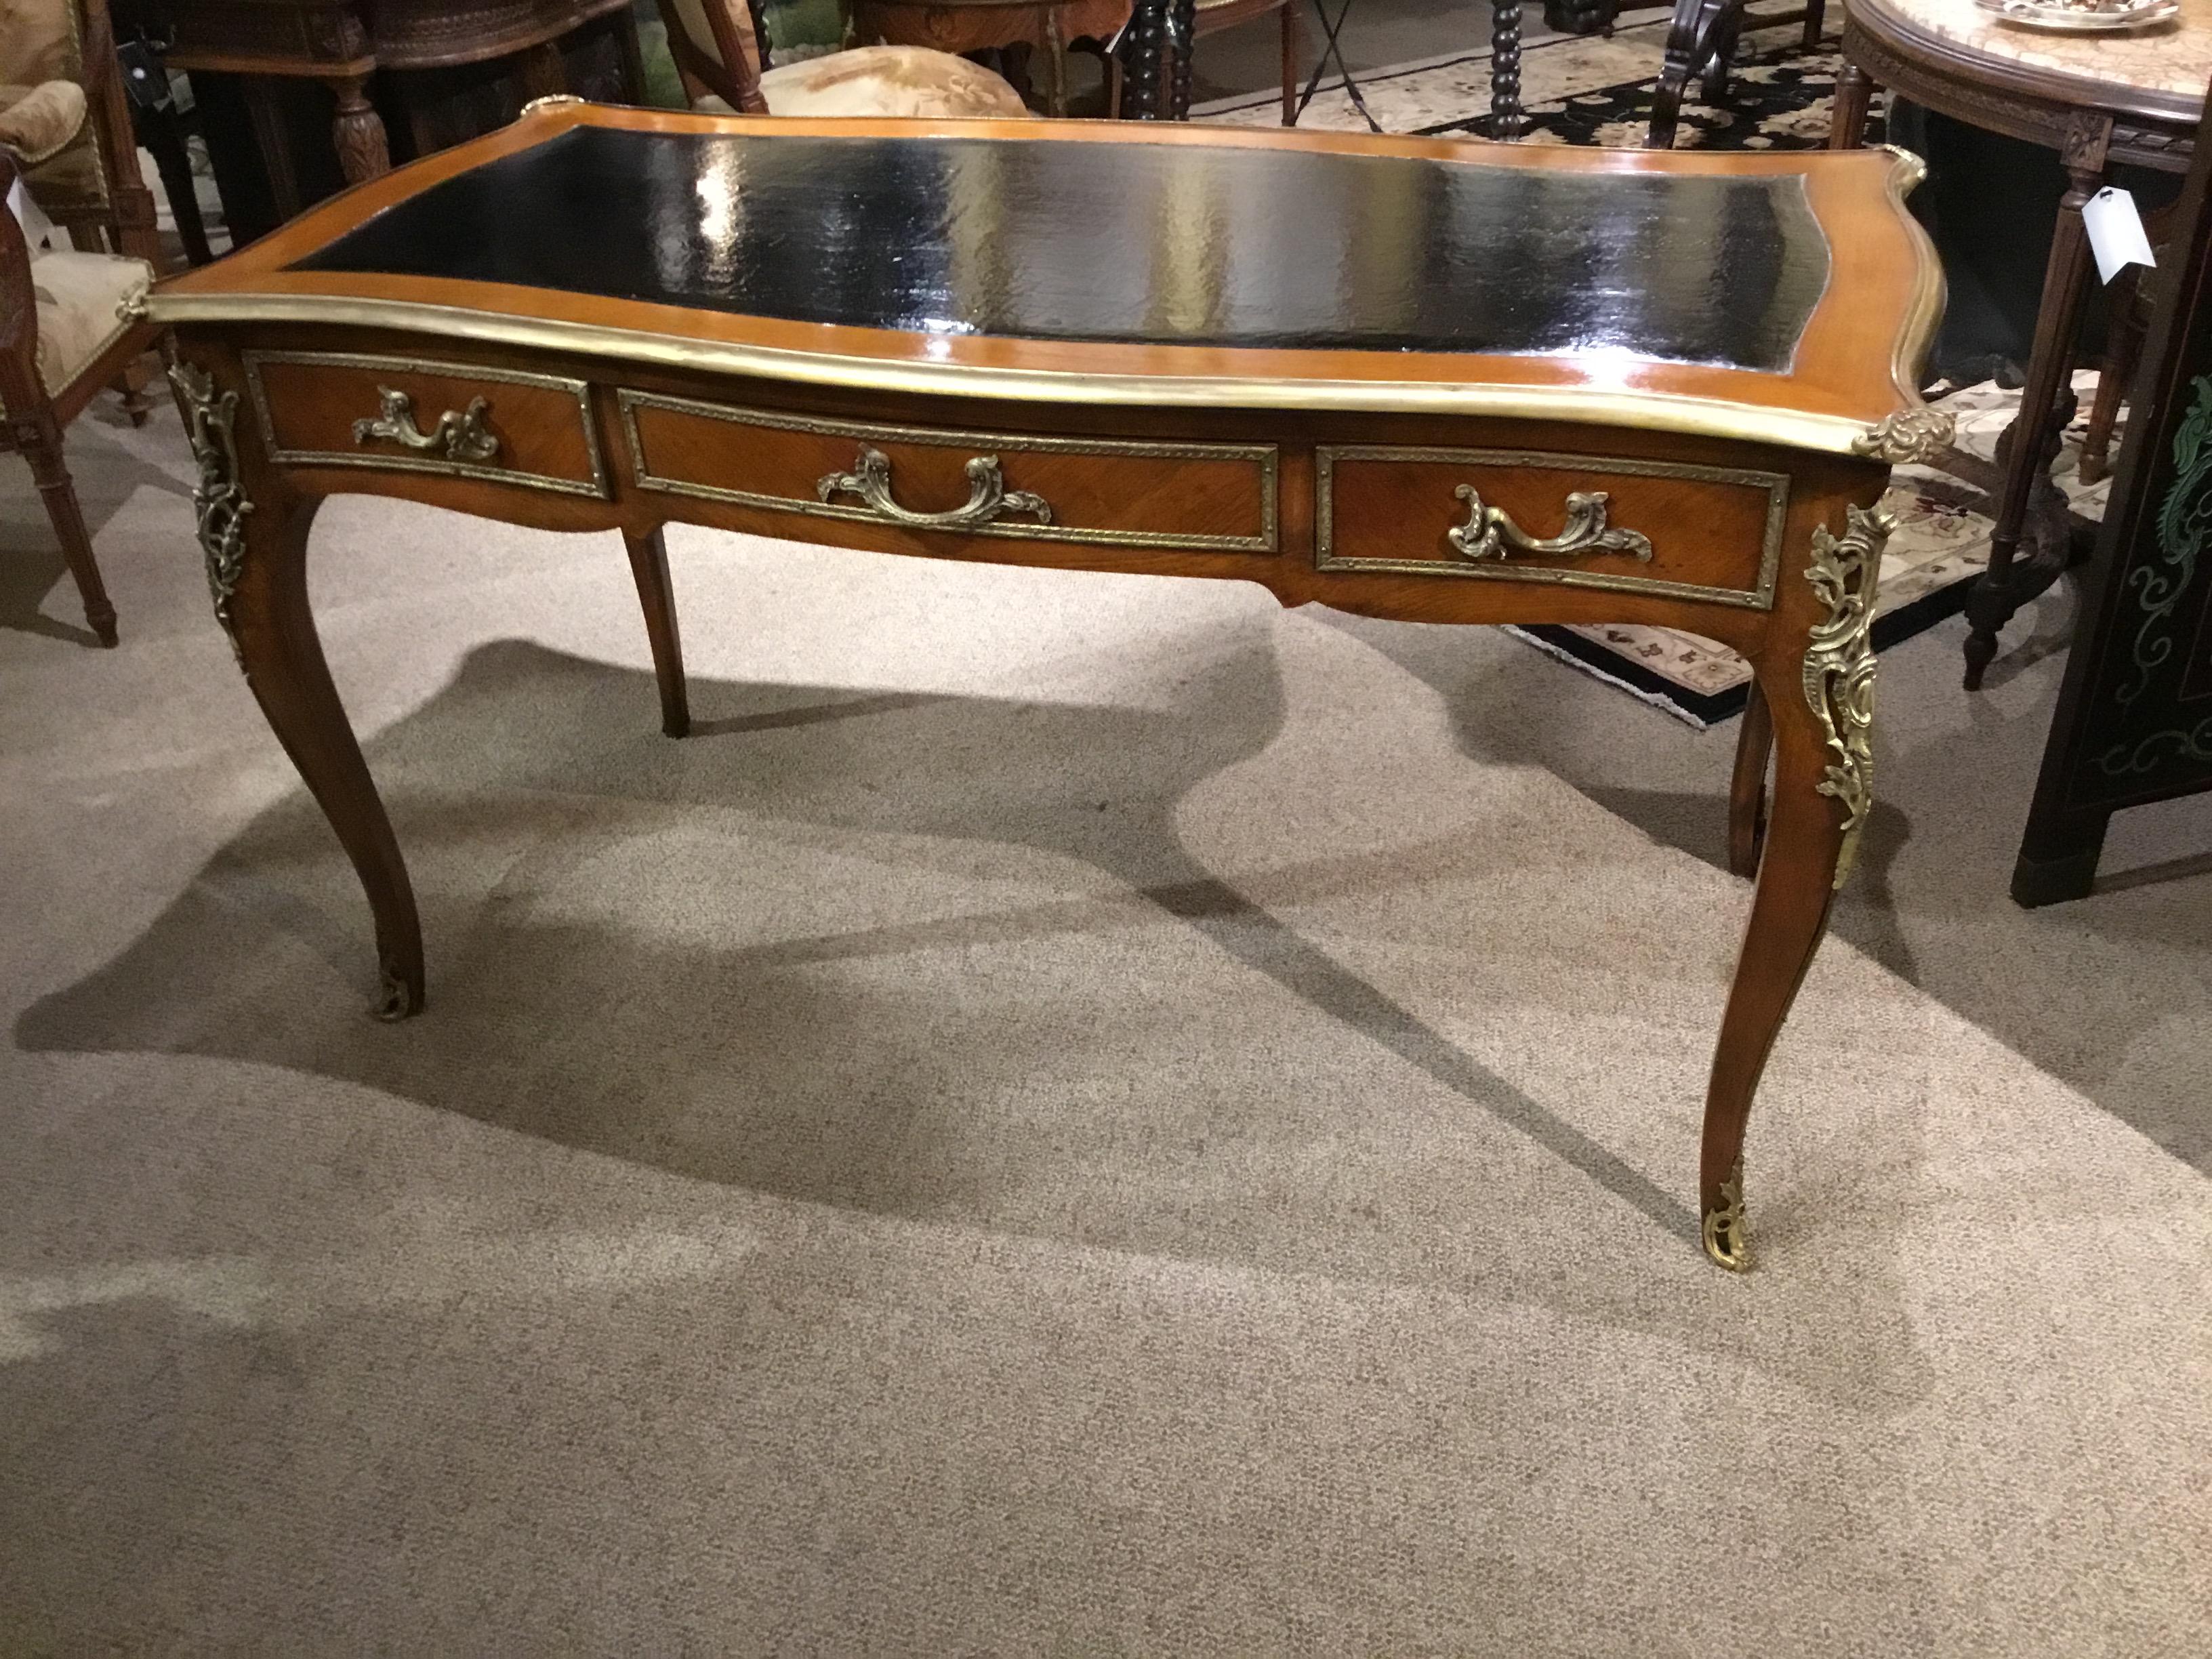 Mid-20th century, the serpentine top with bronze edge moldings and decorative corners, and
An inset tooled leather top, the front fitted with three side by side drawers, raised o cabriole
Legs with ormolu mounts.